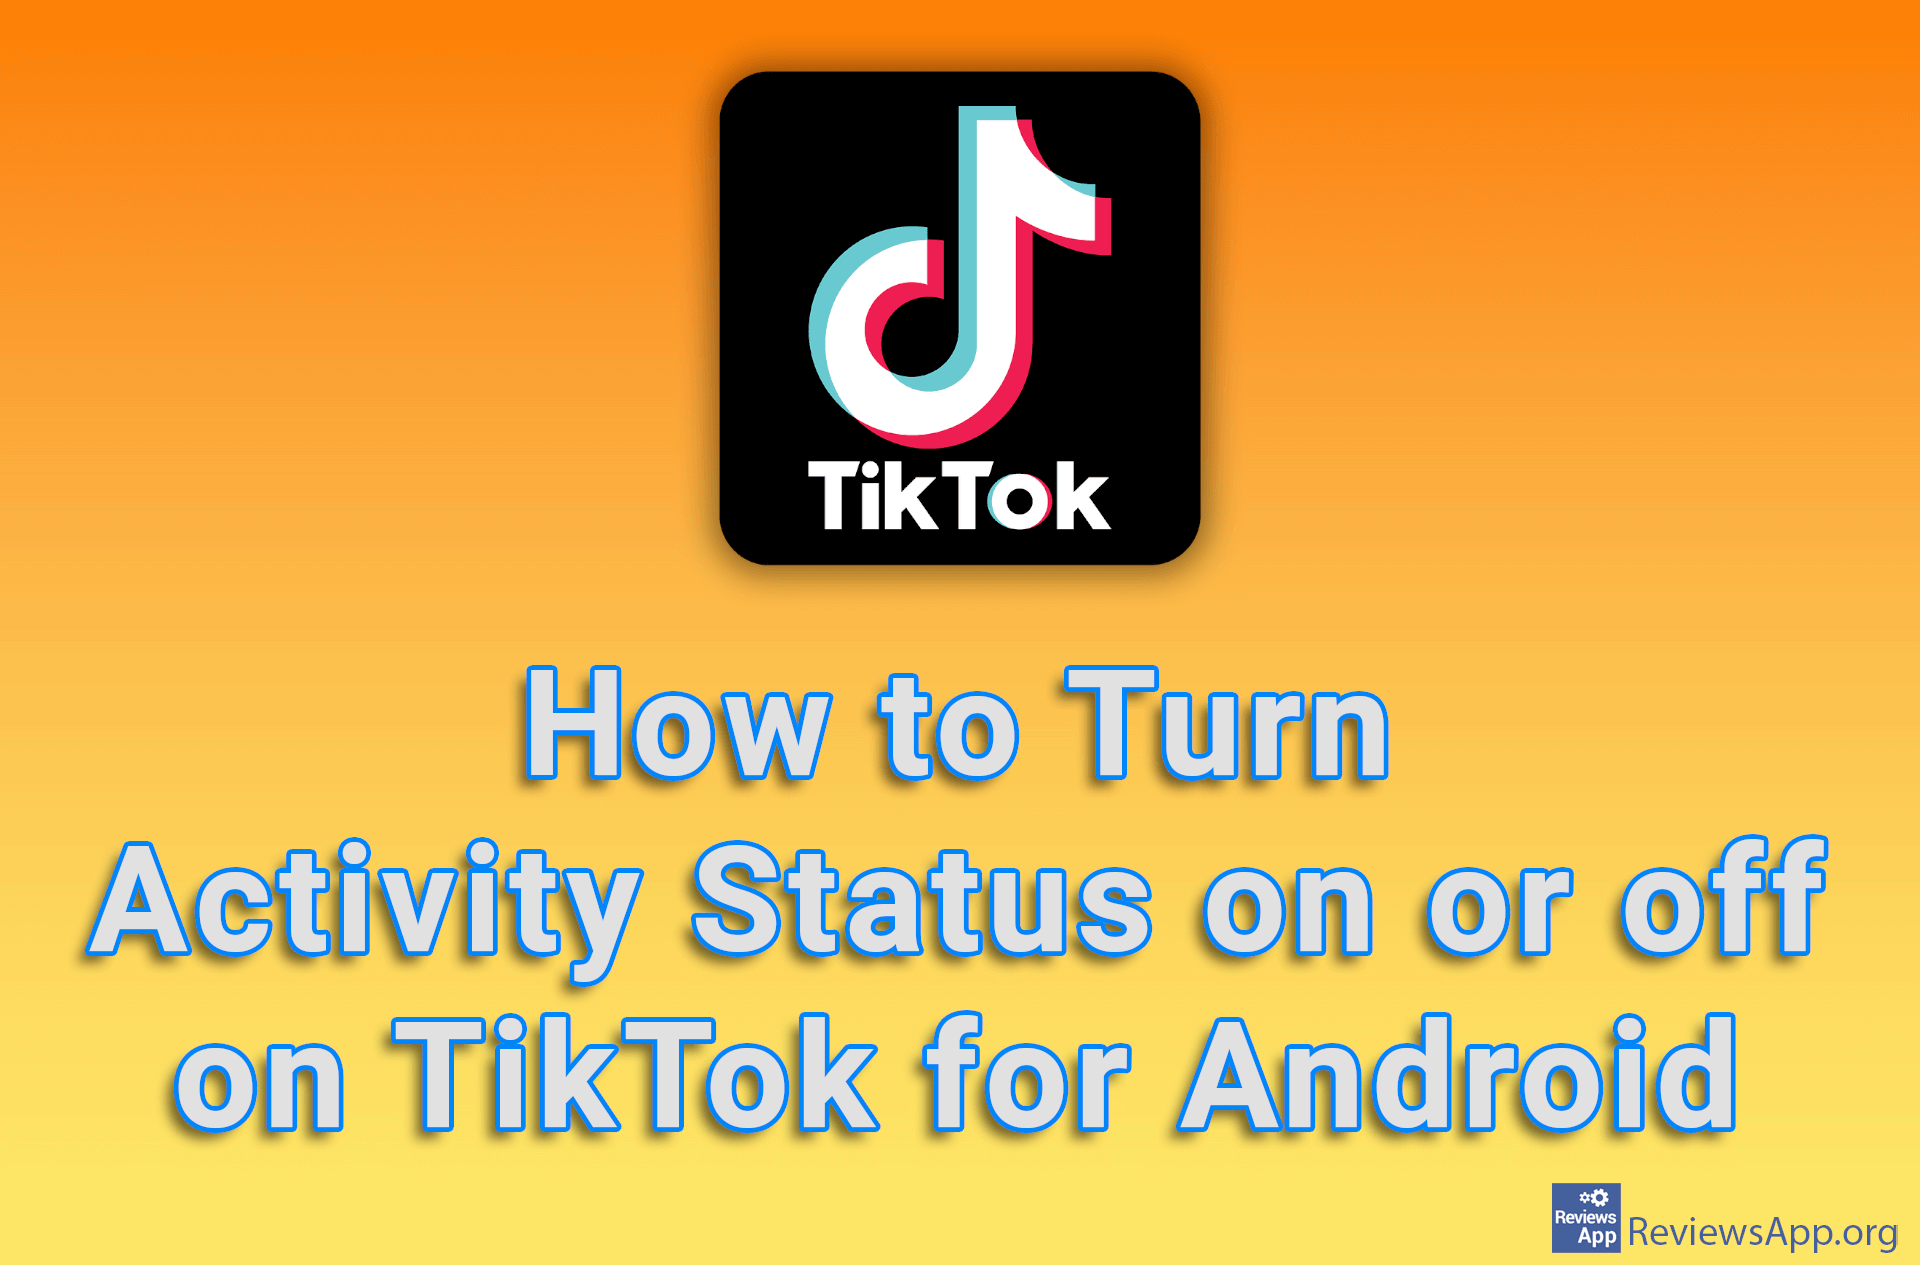 How to Turn Activity Status on or off on TikTok for Android